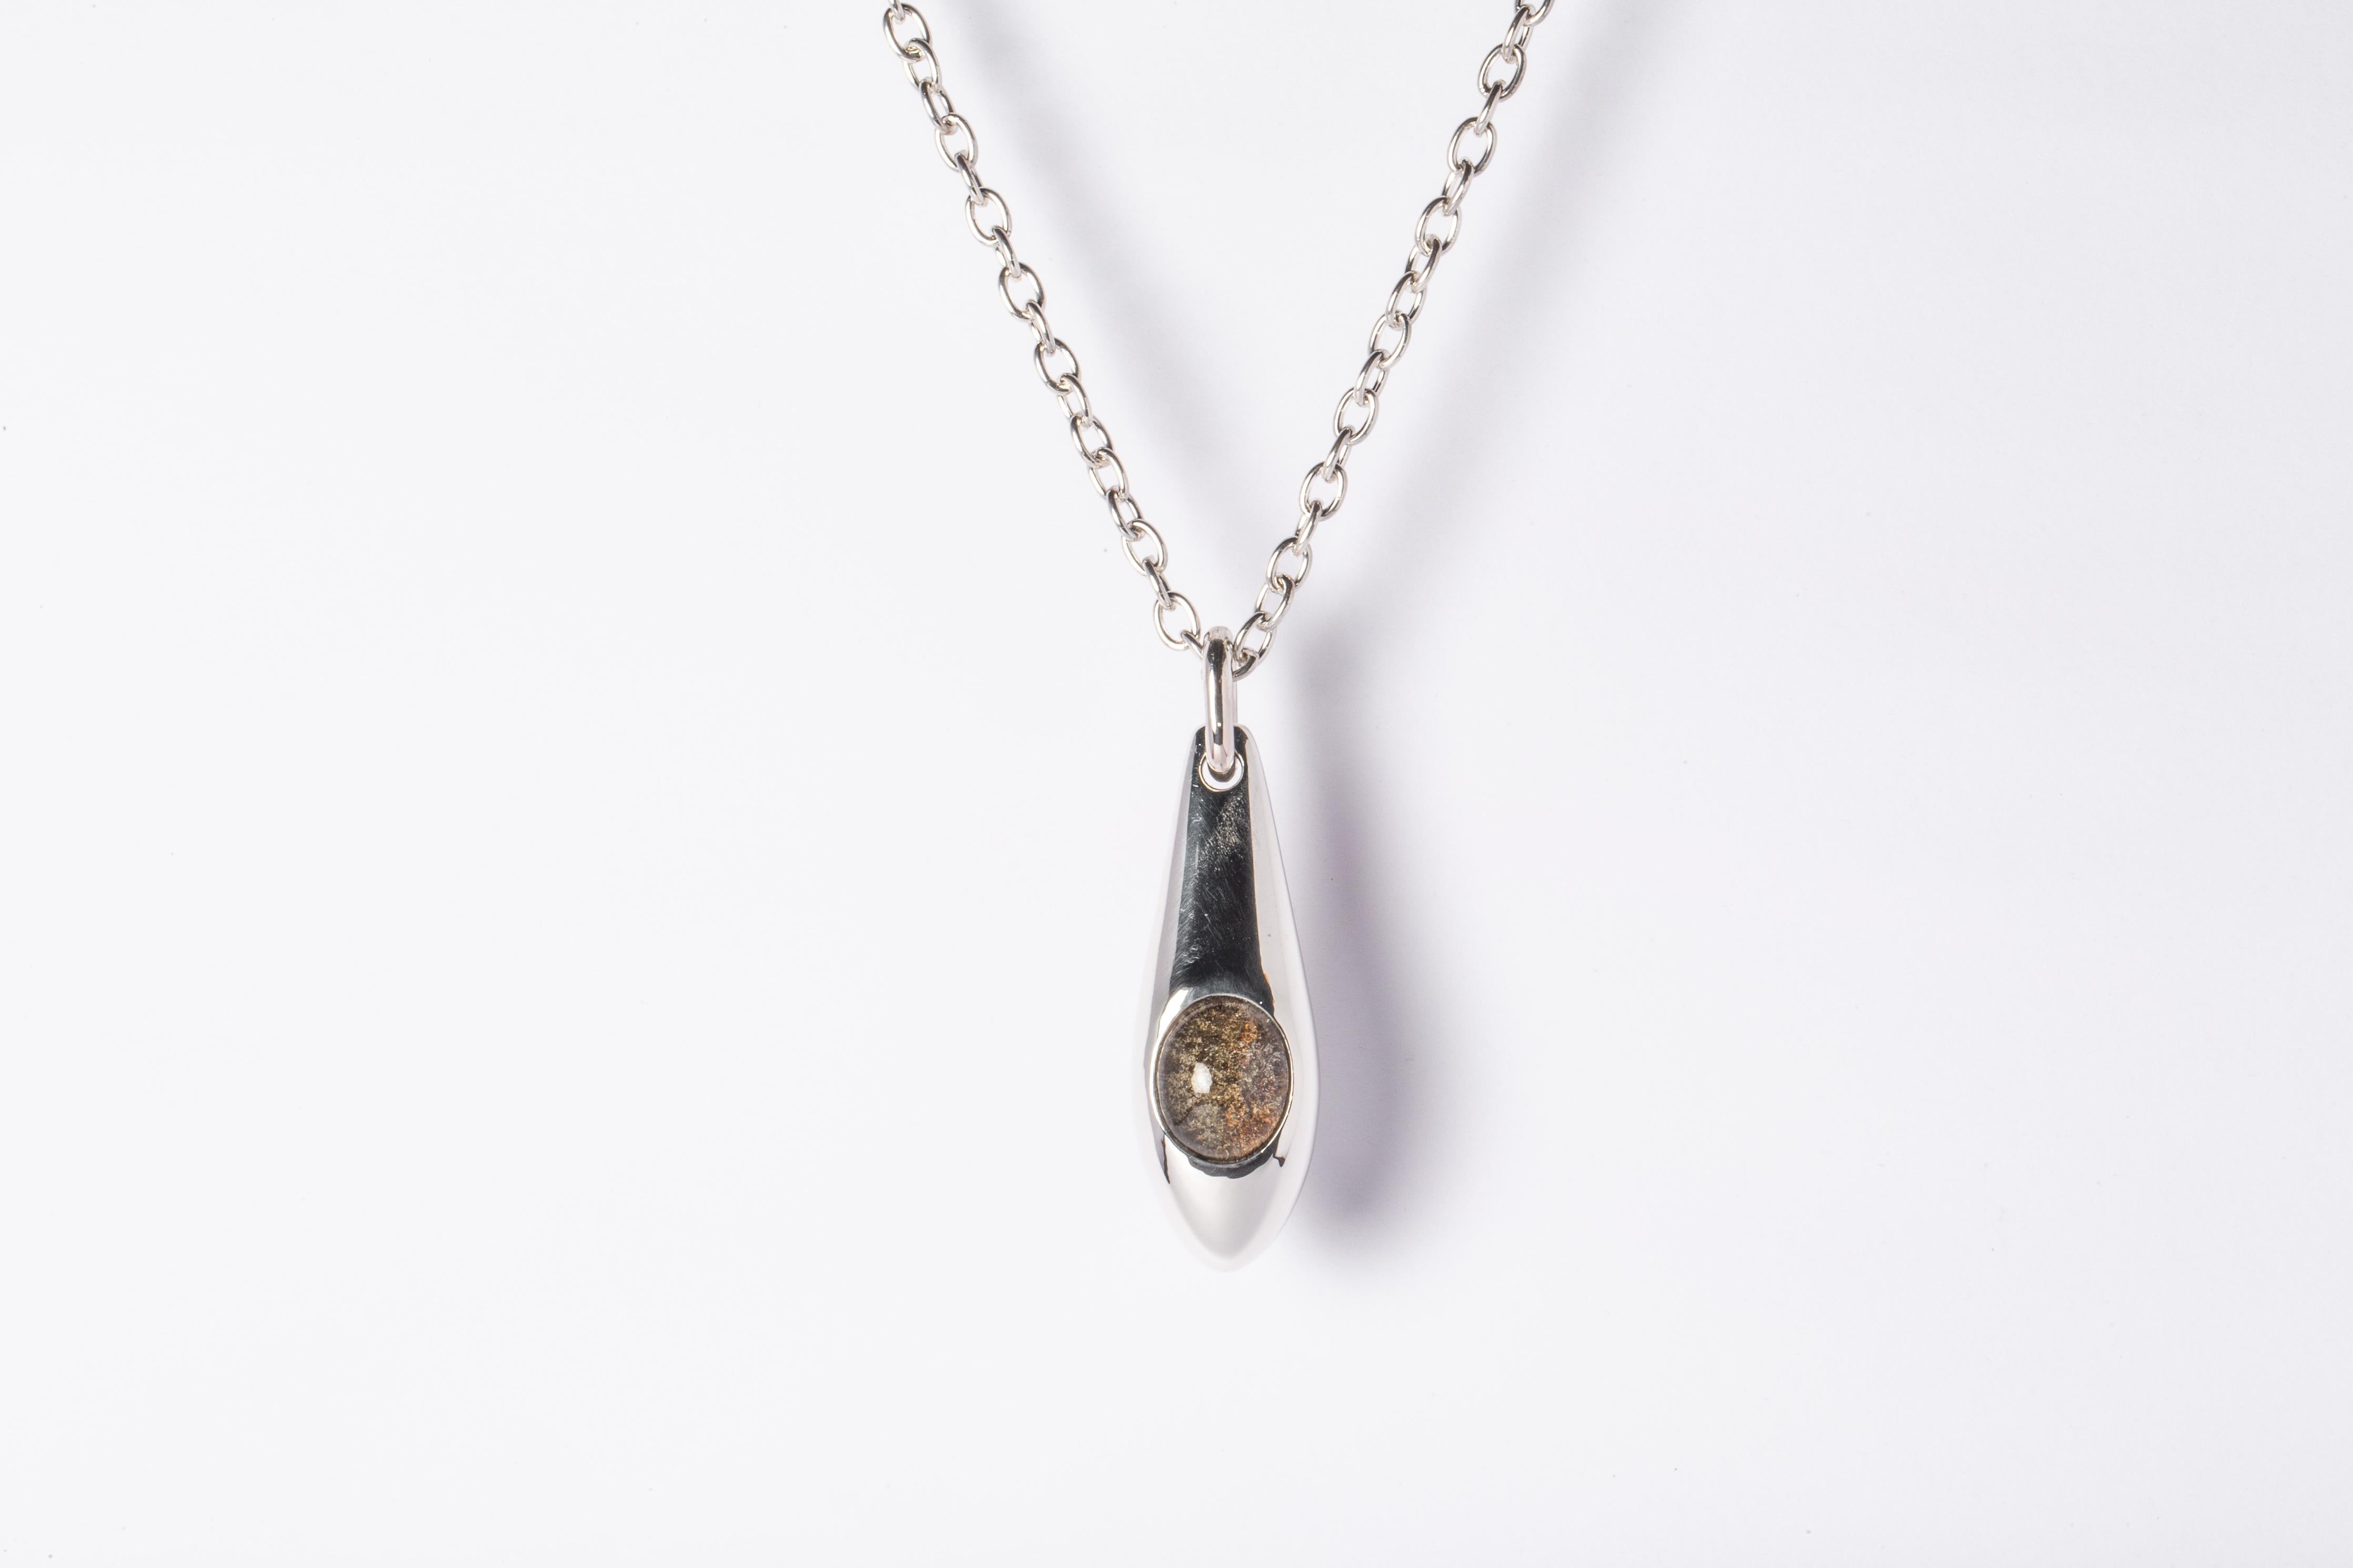 Necklace in the shape of chrysalis made in polished sterling silver and a slab of garden quartz. It comes on a 74 cm sterling silver chain. Each piece a unique and this is what makes it special.